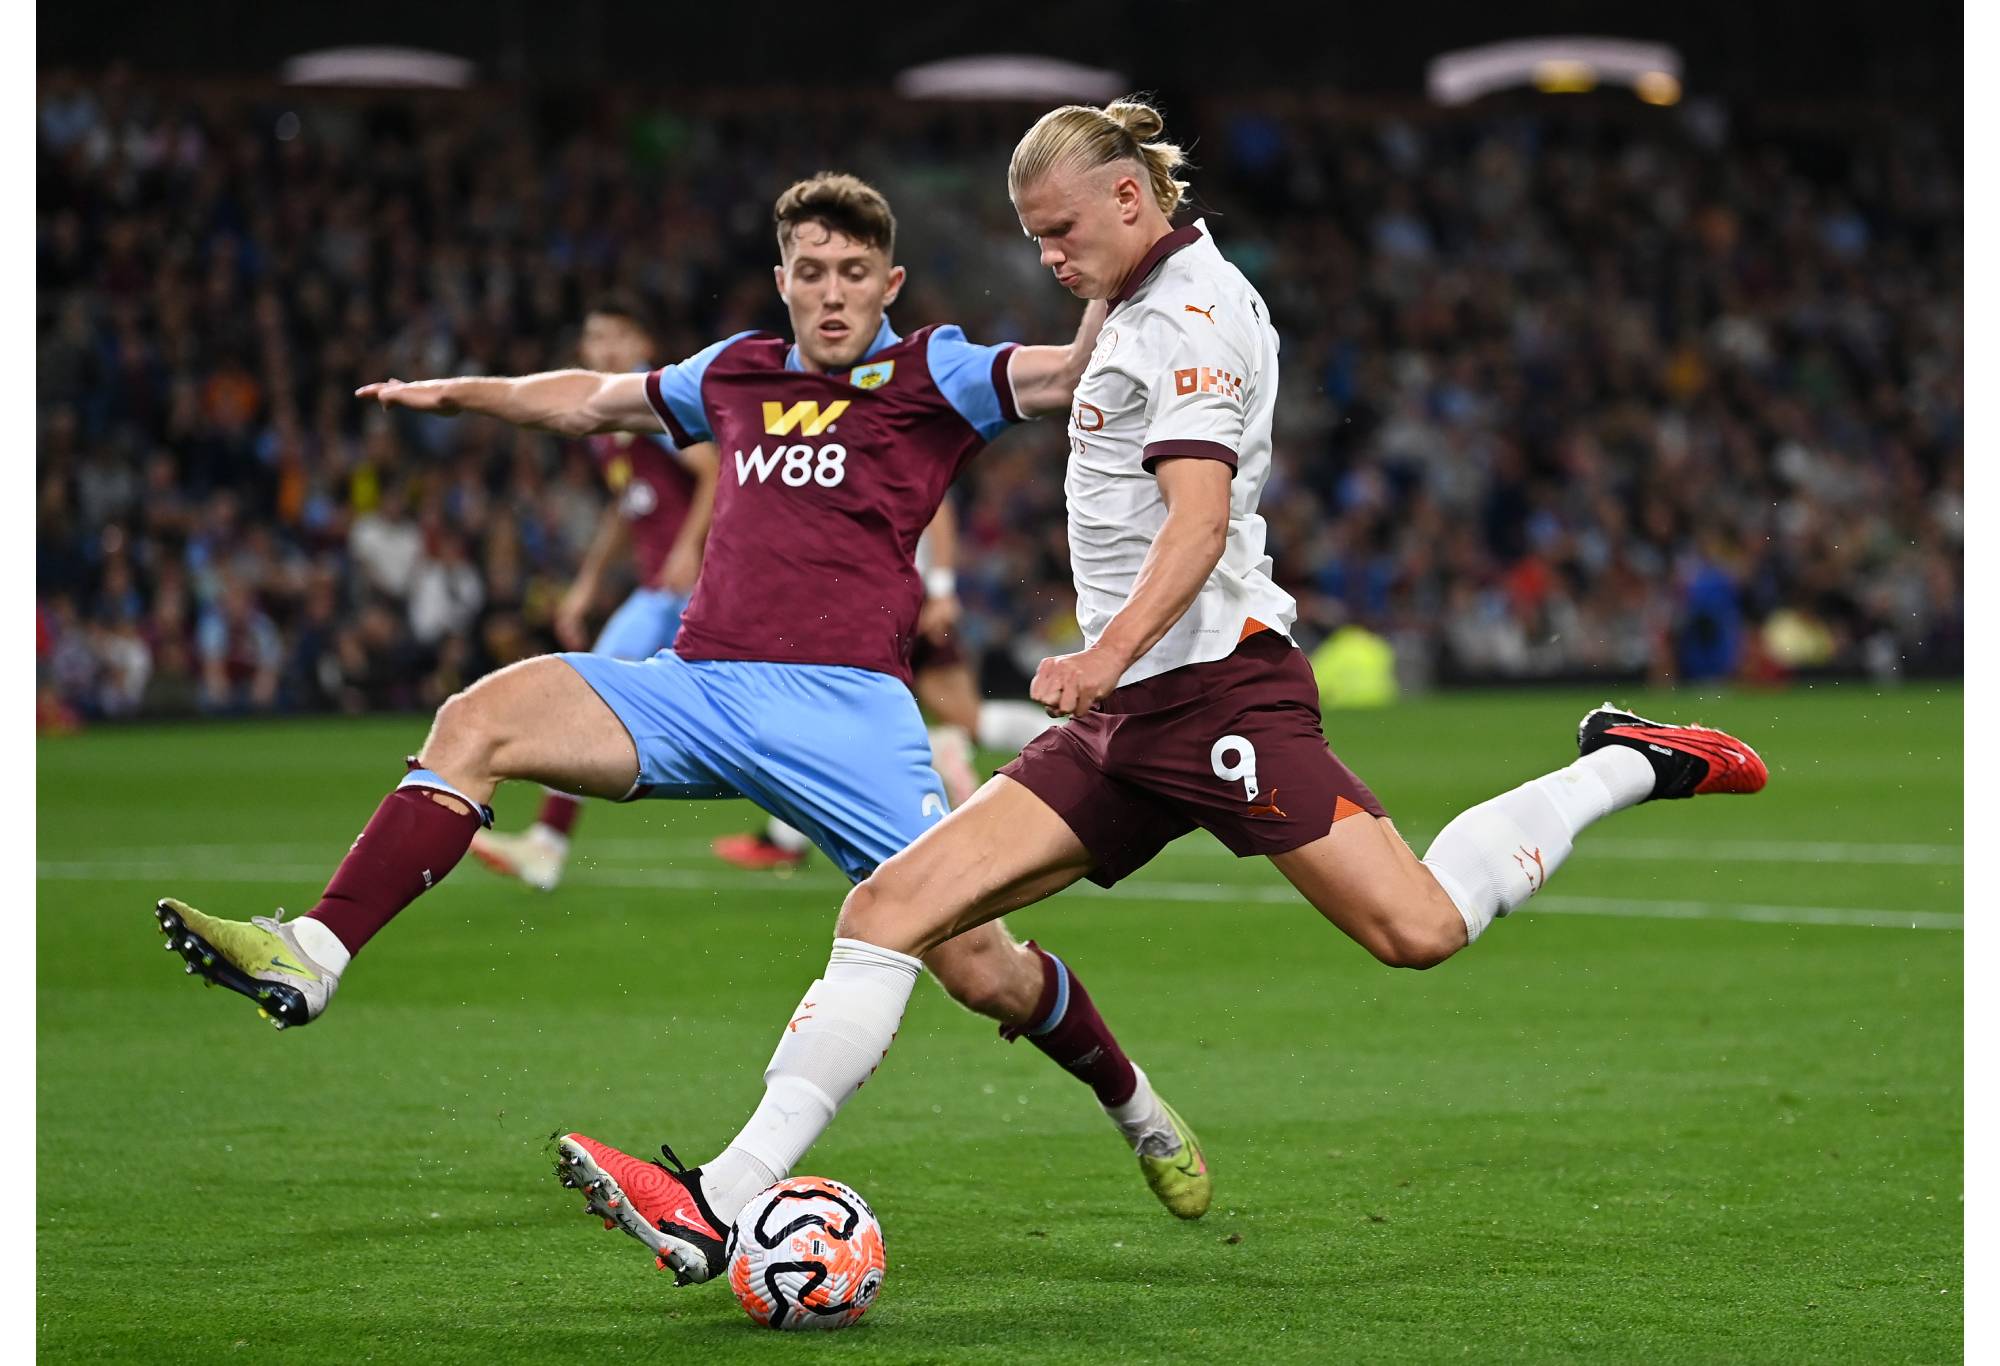 BURNLEY, ENGLAND - AUGUST 11: Erling Haaland of Manchester City crosses the ball whilst under pressure from Dara O'Shea of Burnley during the Premier League match between Burnley FC and Manchester City at Turf Moor on August 11, 2023 in Burnley, England. (Photo by Michael Regan/Getty Images)